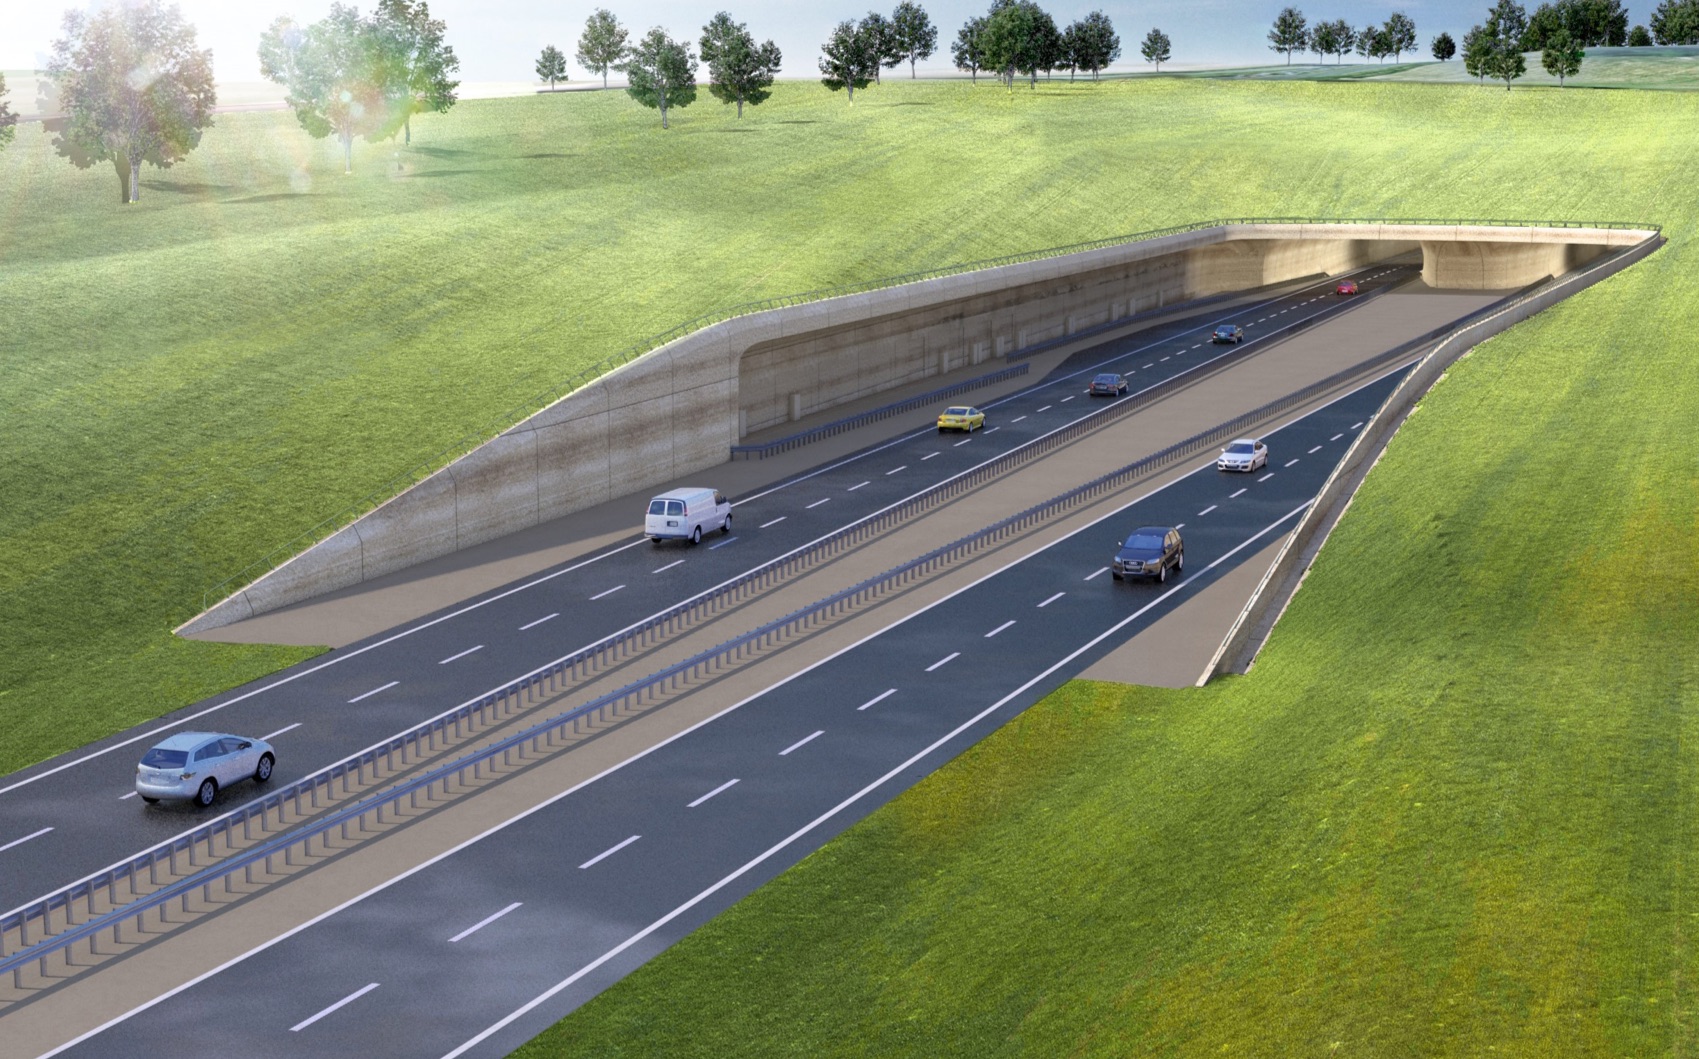 £60m Stonehenge Tunnel Deal for Costain and Mott MacDonald